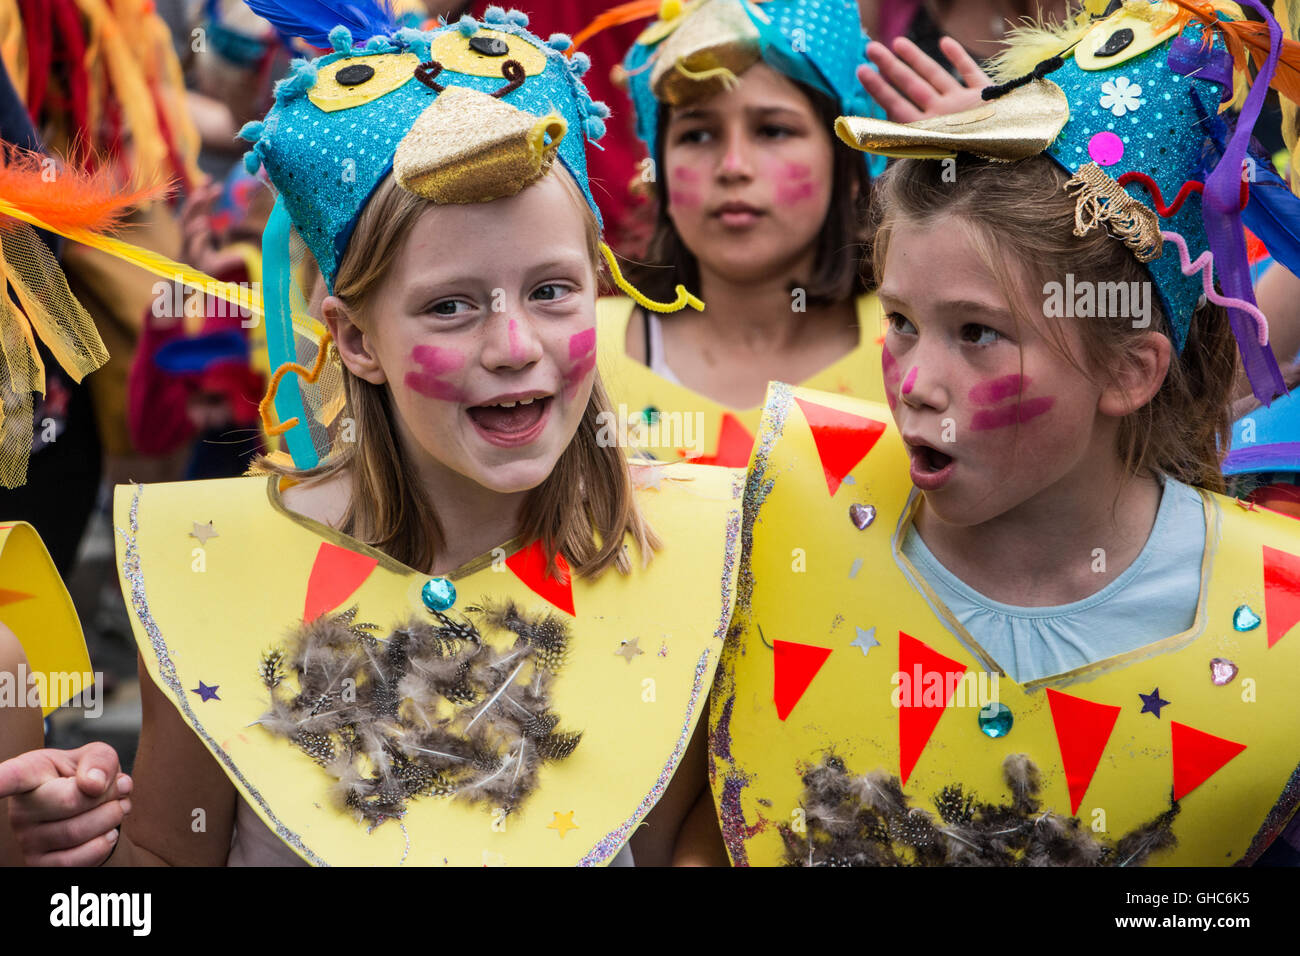 Two young girls in costume taking part in the 2016 Bath Street Carnival, UK Stock Photo